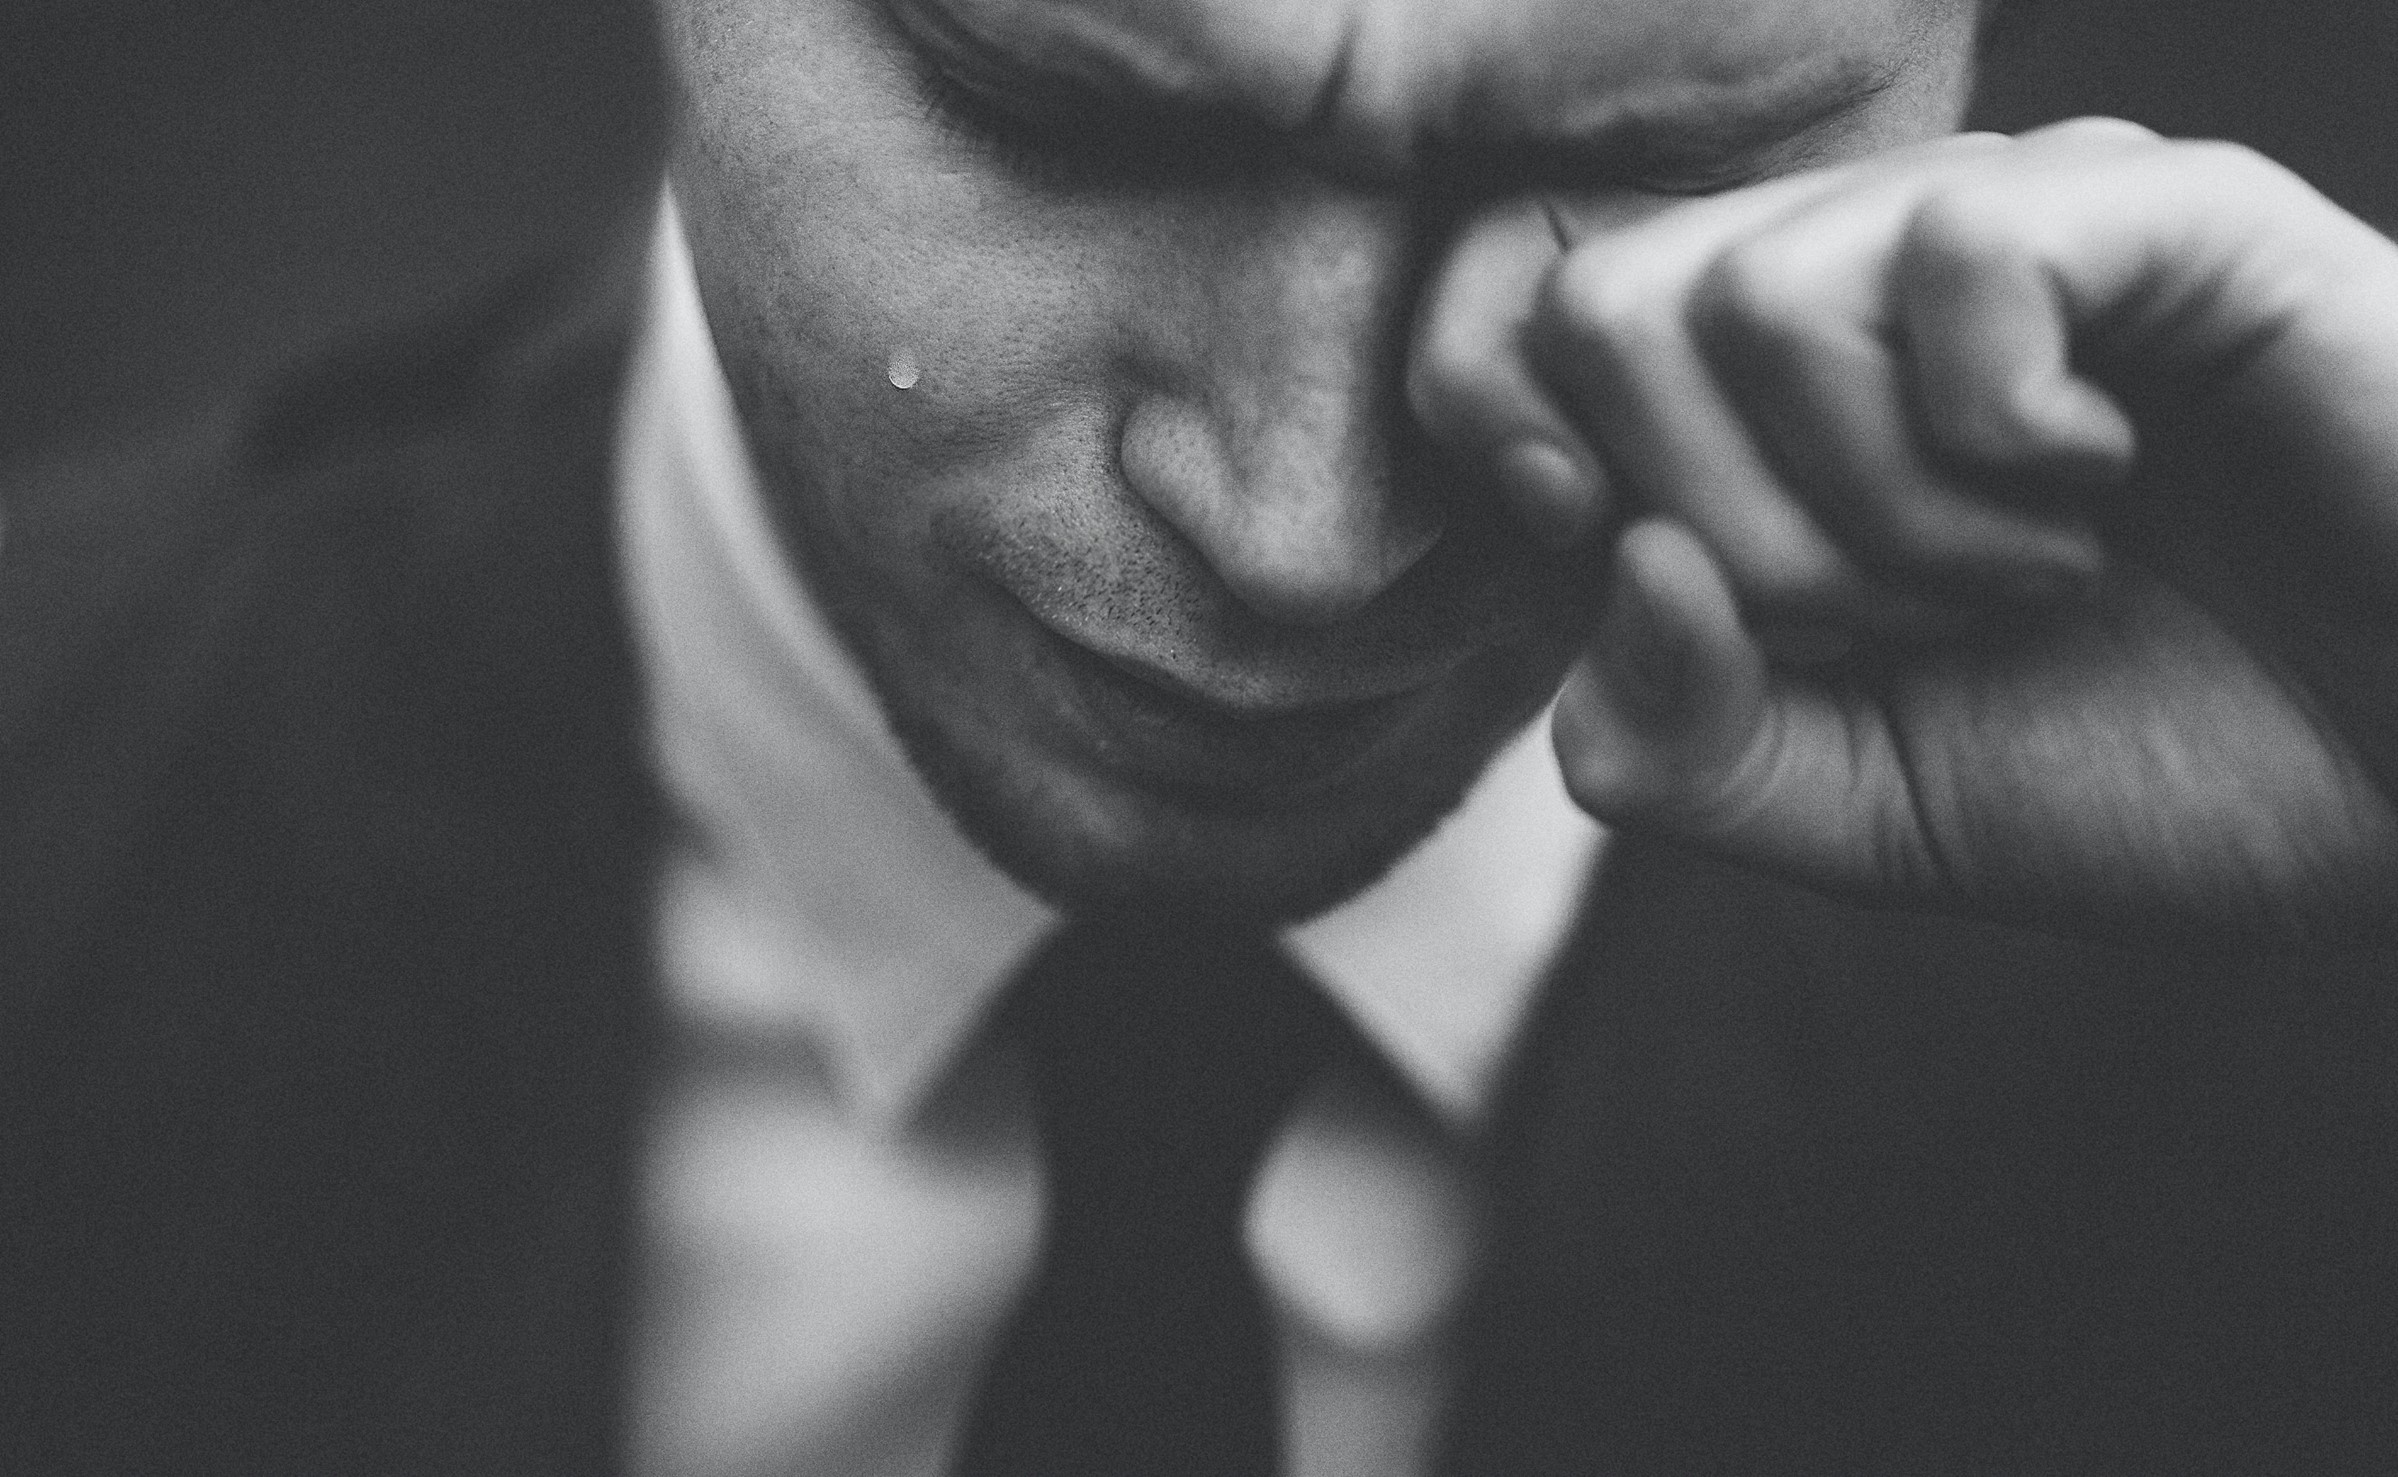 Man crying in black and white